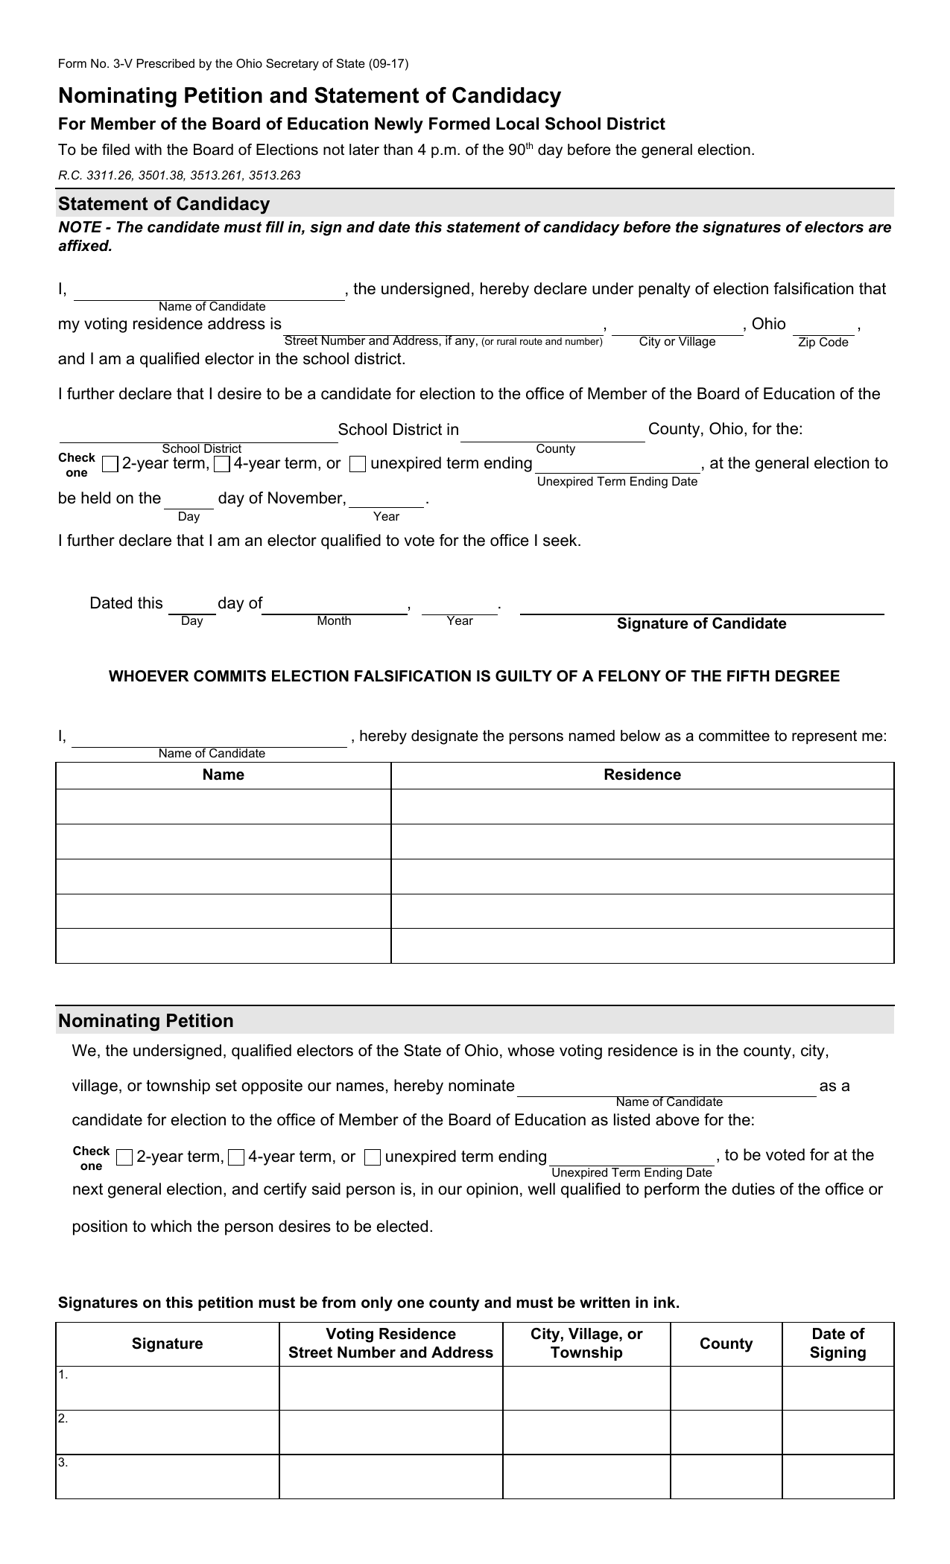 Form 3-V Nominating Petition and Statement of Candidacy for Member of the Board of Education Newly Formed Local School District - Ohio, Page 1